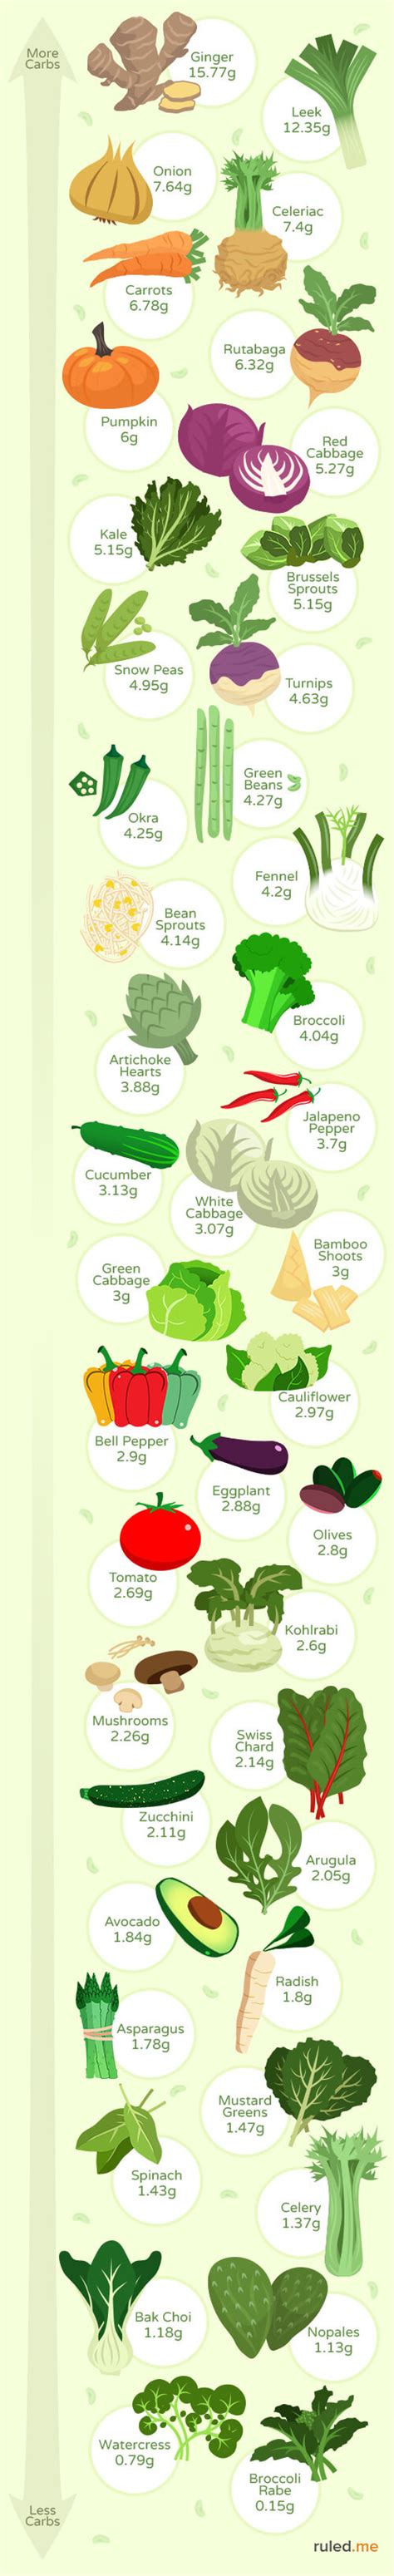 The Best Low Carb Vegetables For Keto Ruled Me